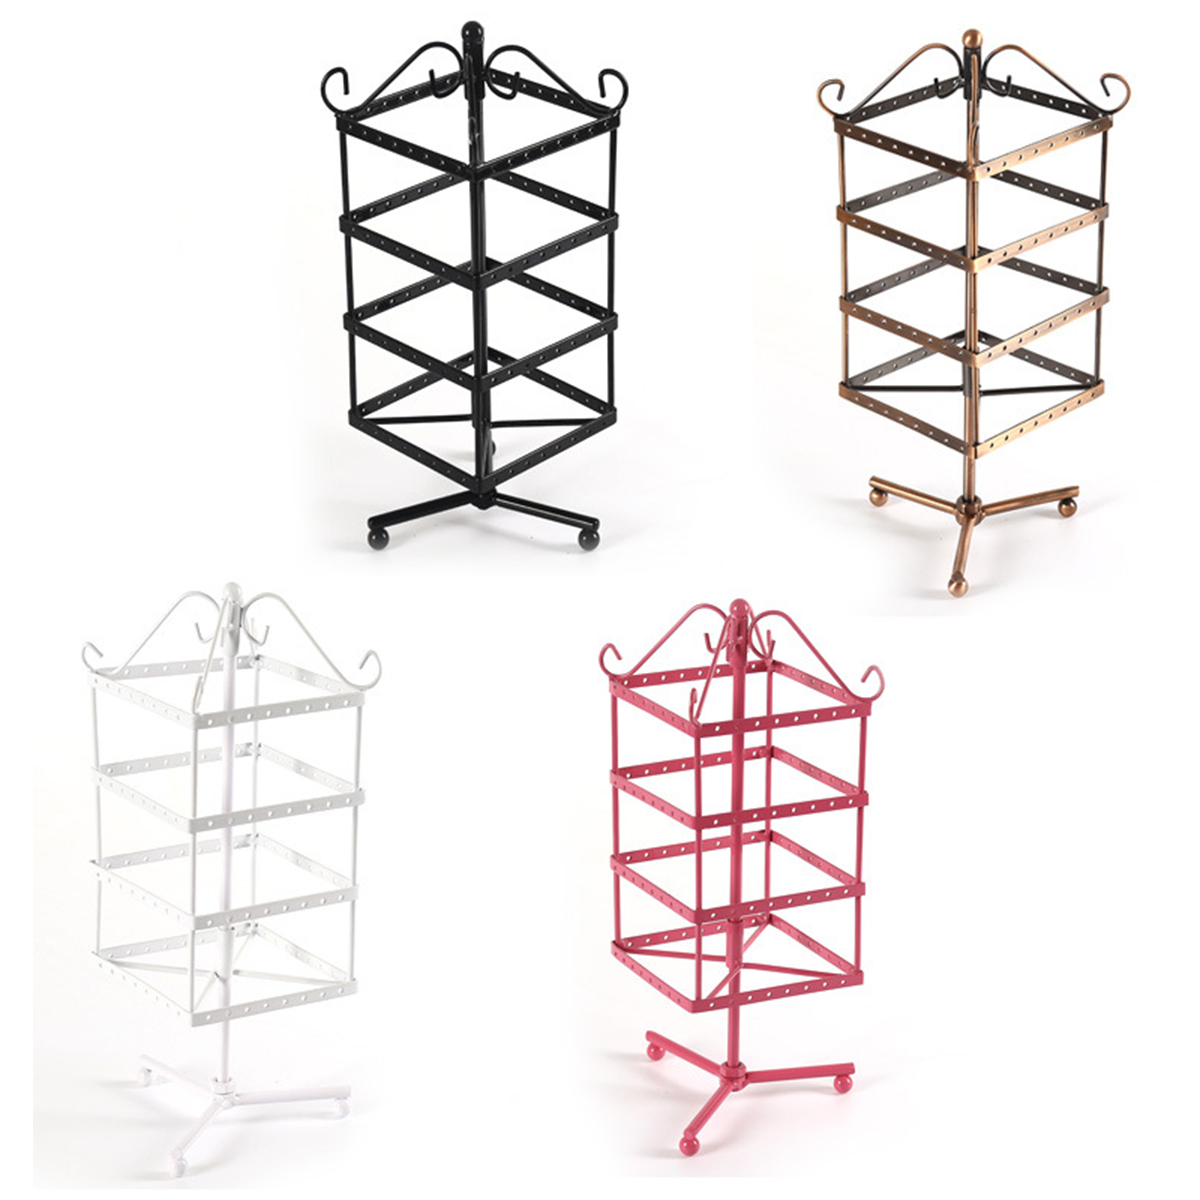 

128 Holes Rotating Earring Iron Stand Ring Display Square Jewelry Rack Holder